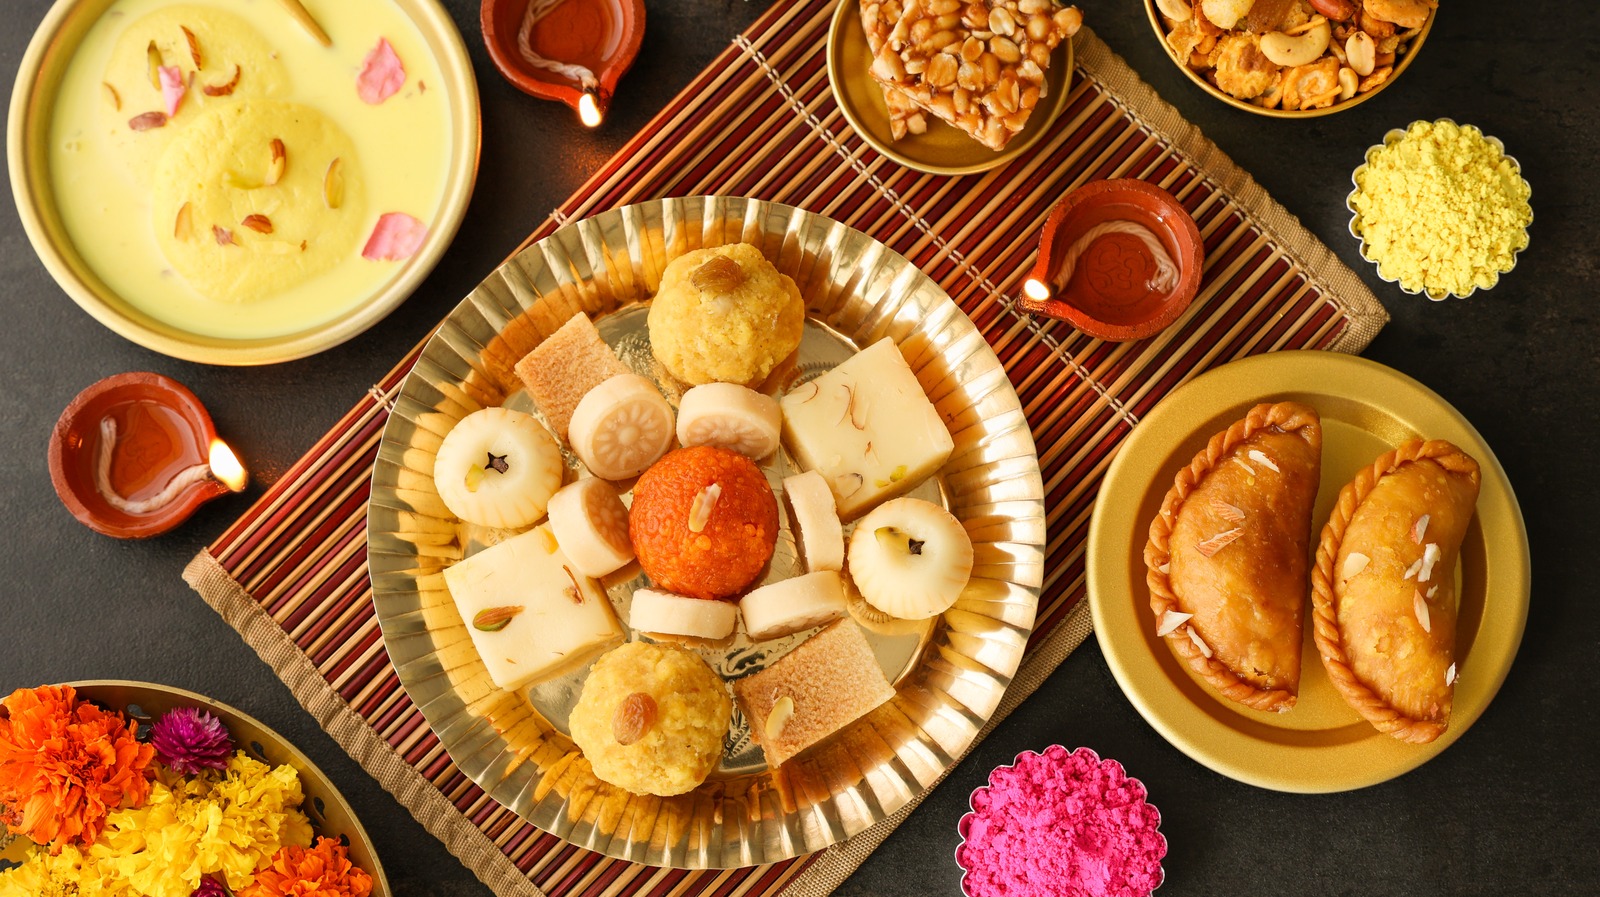 https://www.tastingtable.com/img/gallery/17-must-try-north-indian-mithai/l-intro-1672669787.jpg